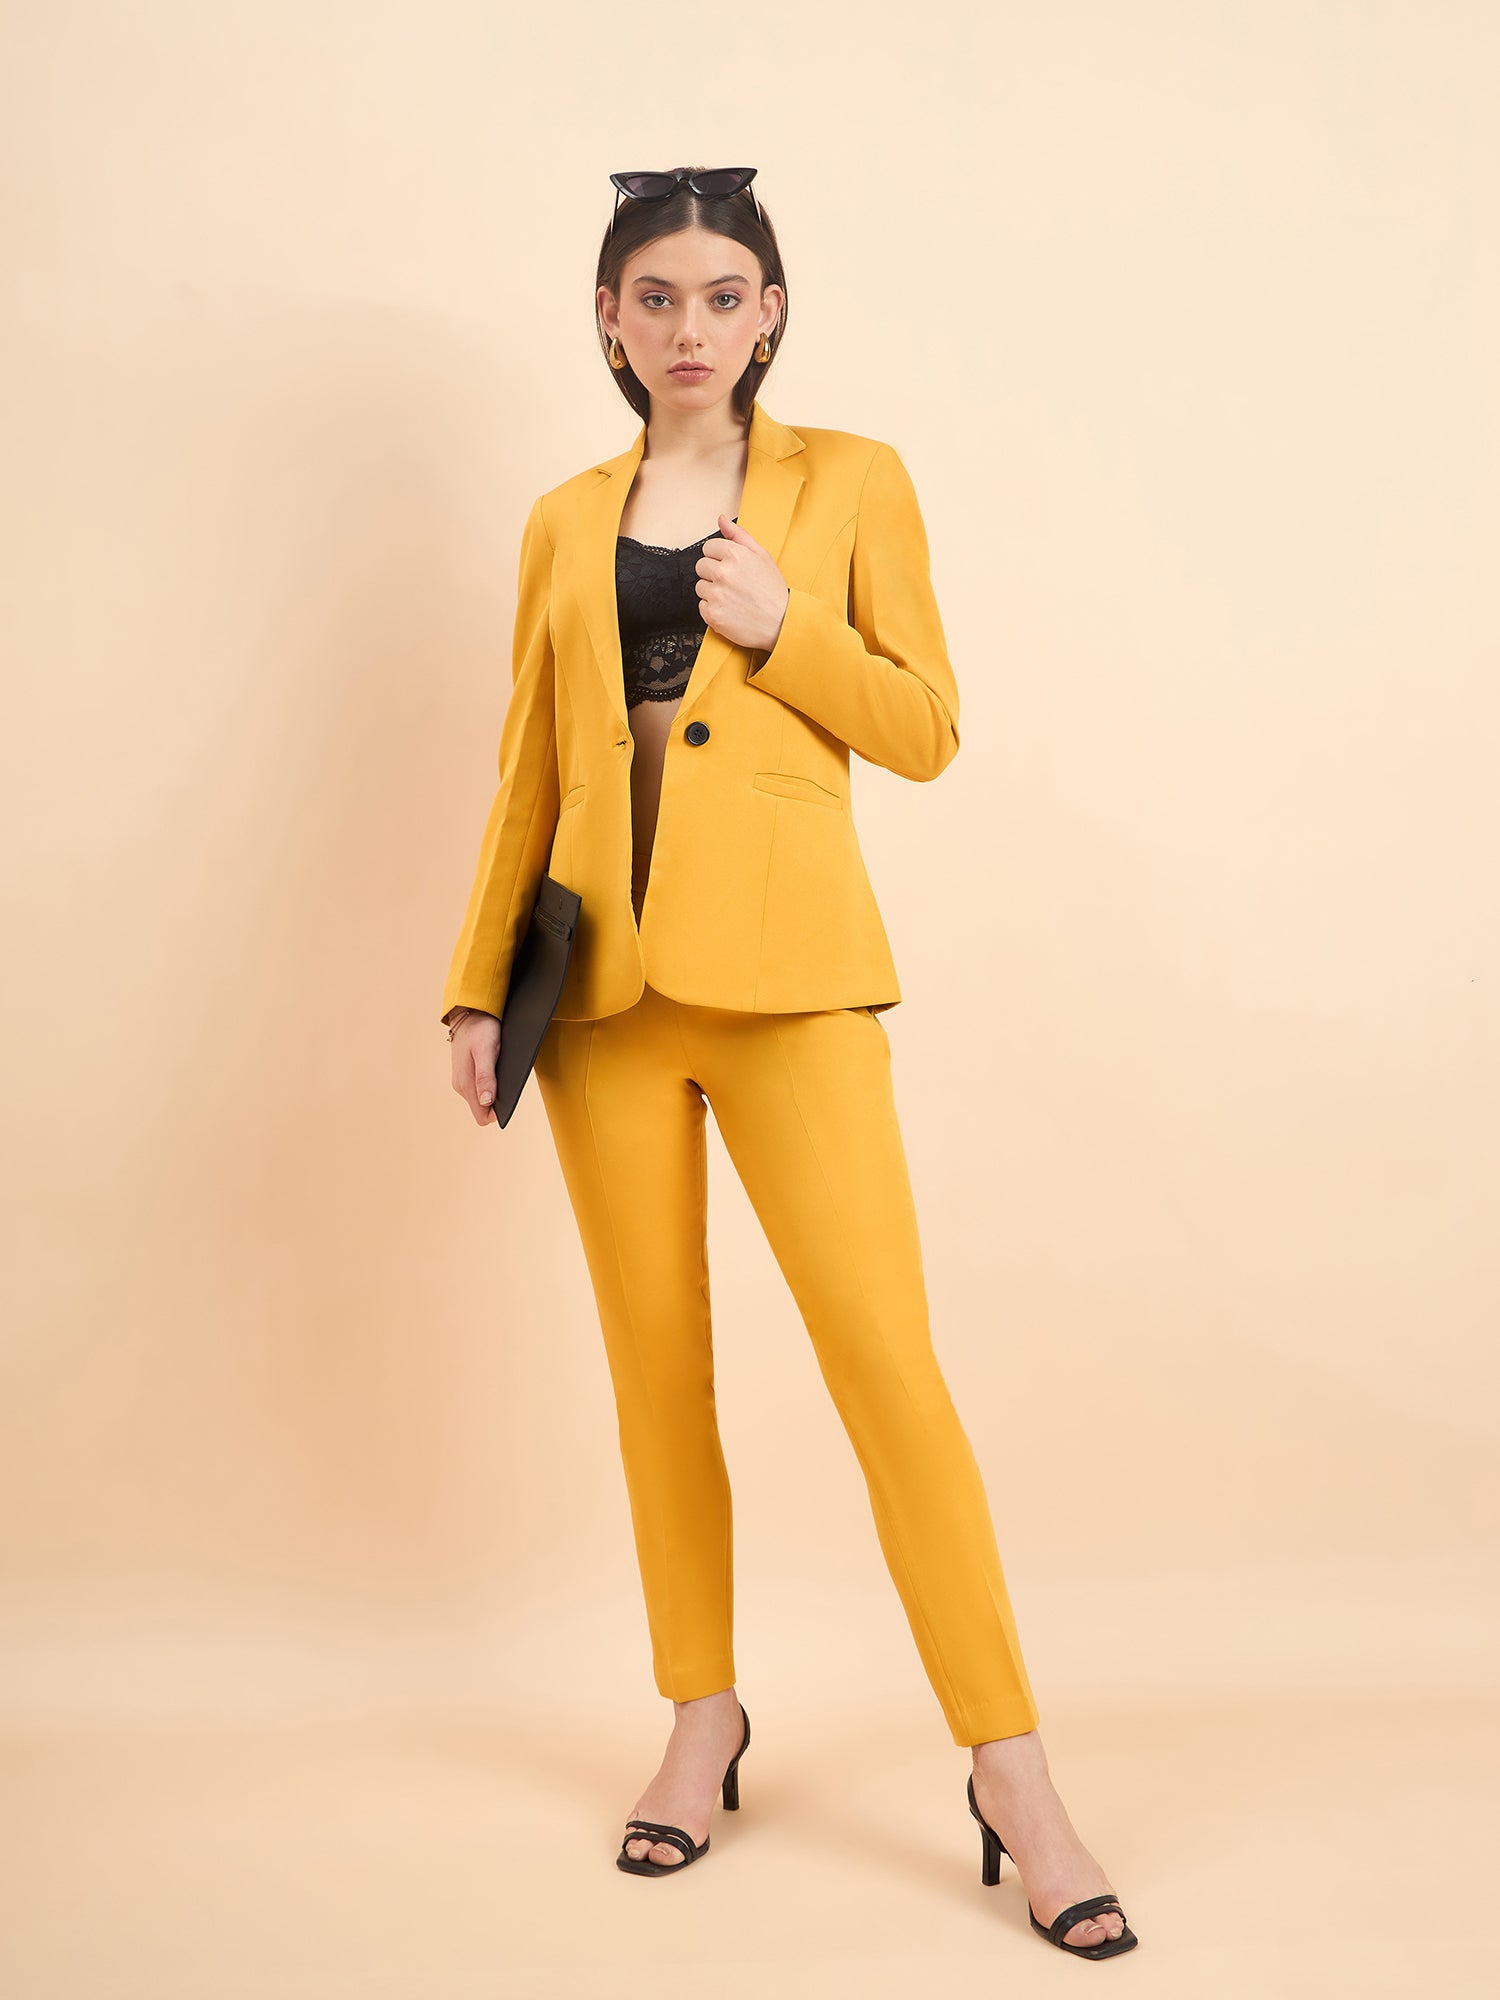 Women's Formal Pant Suit For Work- Mustard Yellow